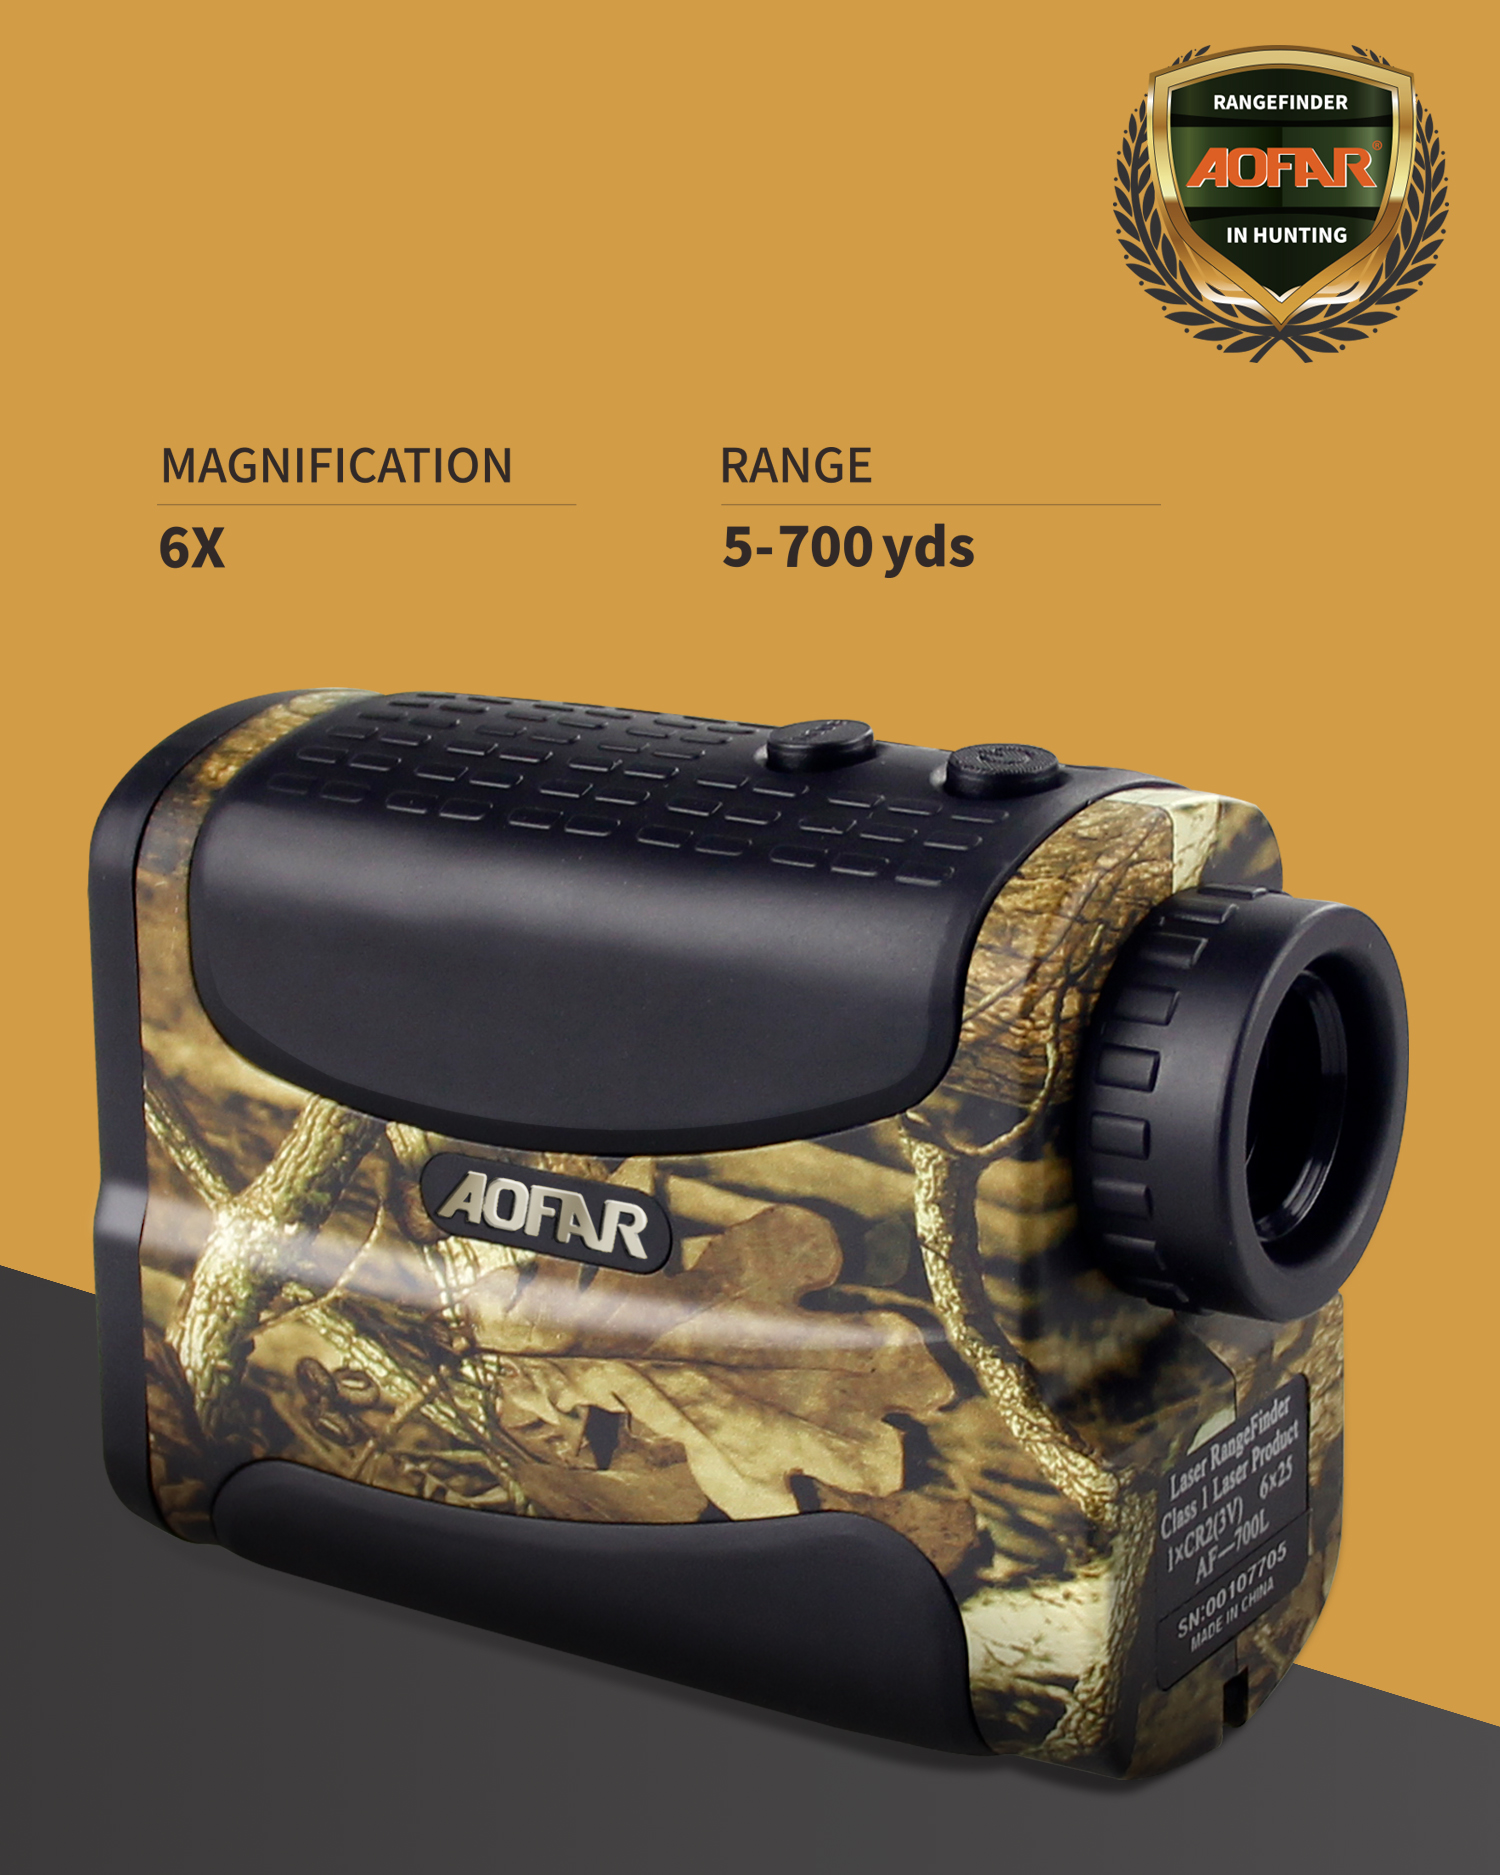 AOFAR Hunting Archery Range Finder HX-700N 700 Yards Waterproof Rangefinder for Bow Hunting with Range Scan Fog and Speed Mode, Free Battery, Carrying Case - image 4 of 6